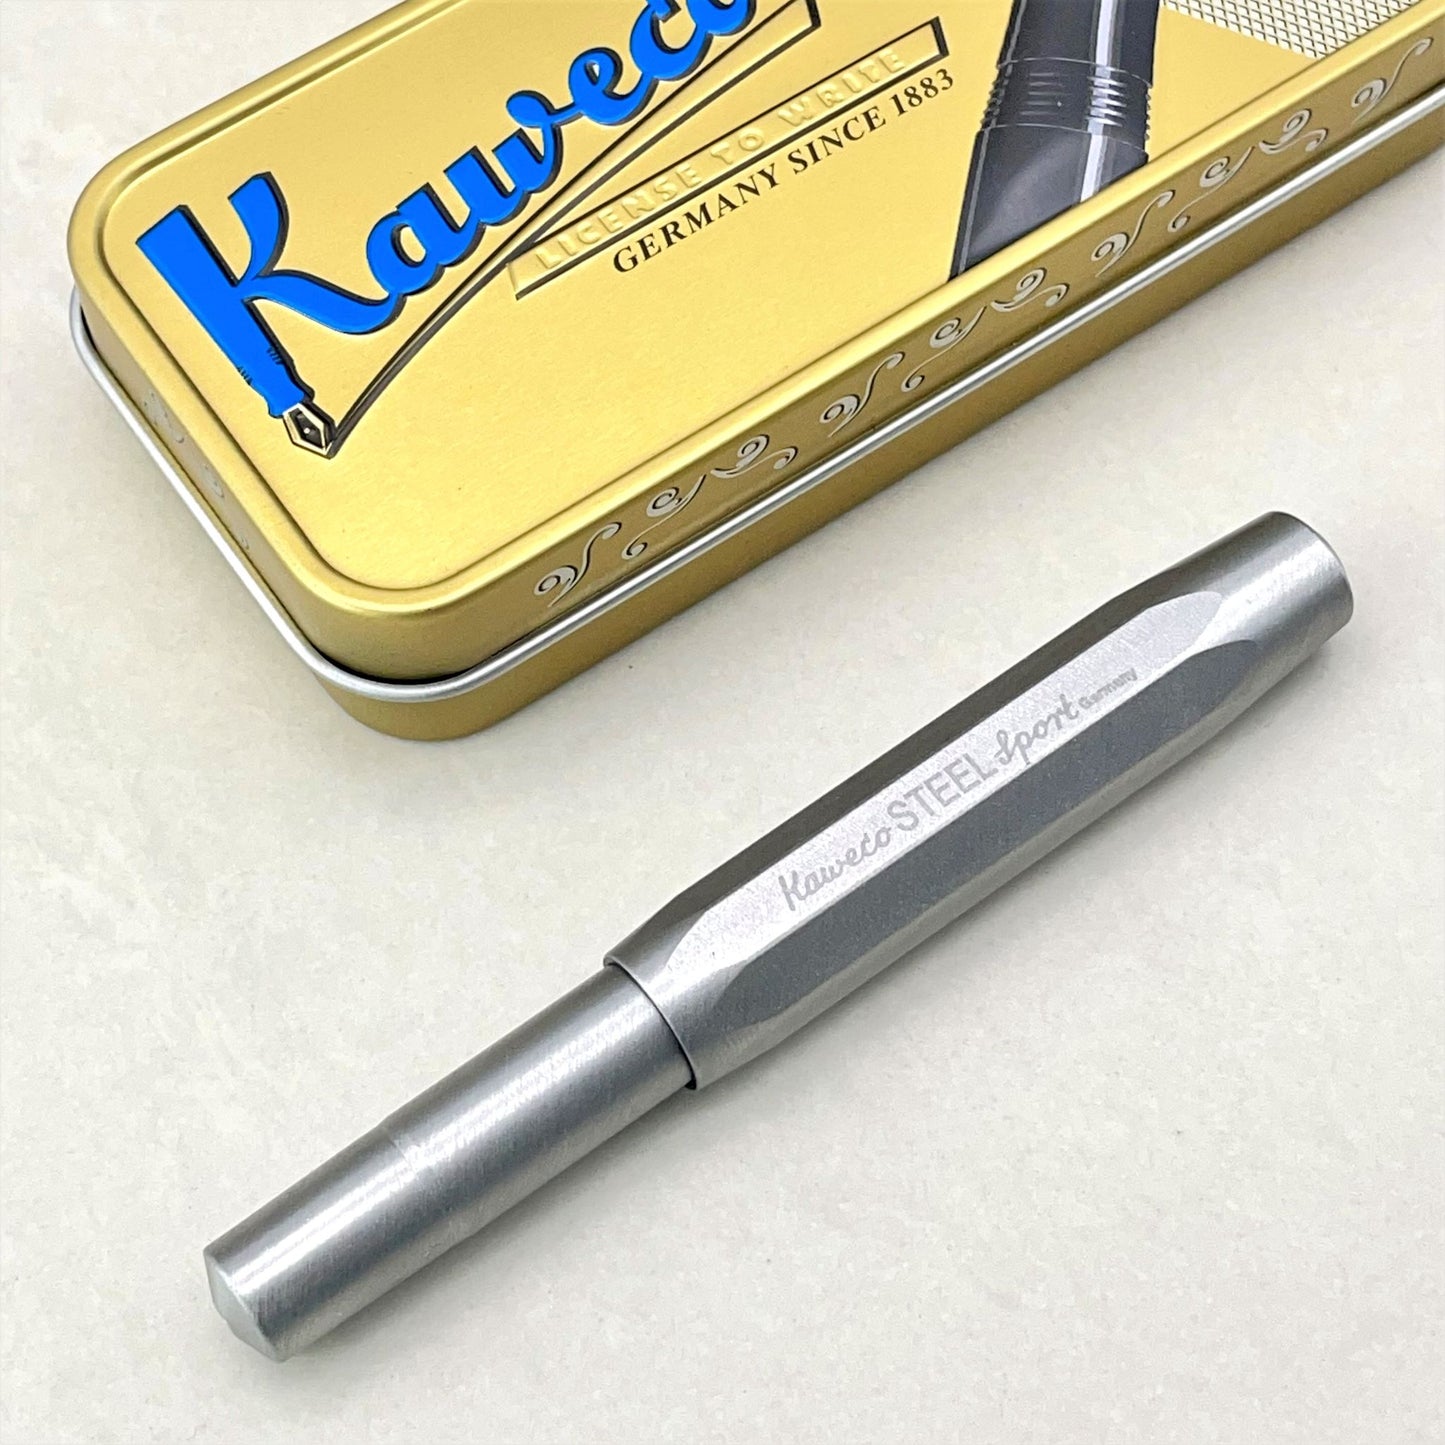 Kaweco Steel Sport fountain pen, pictured with branded tin presentation box